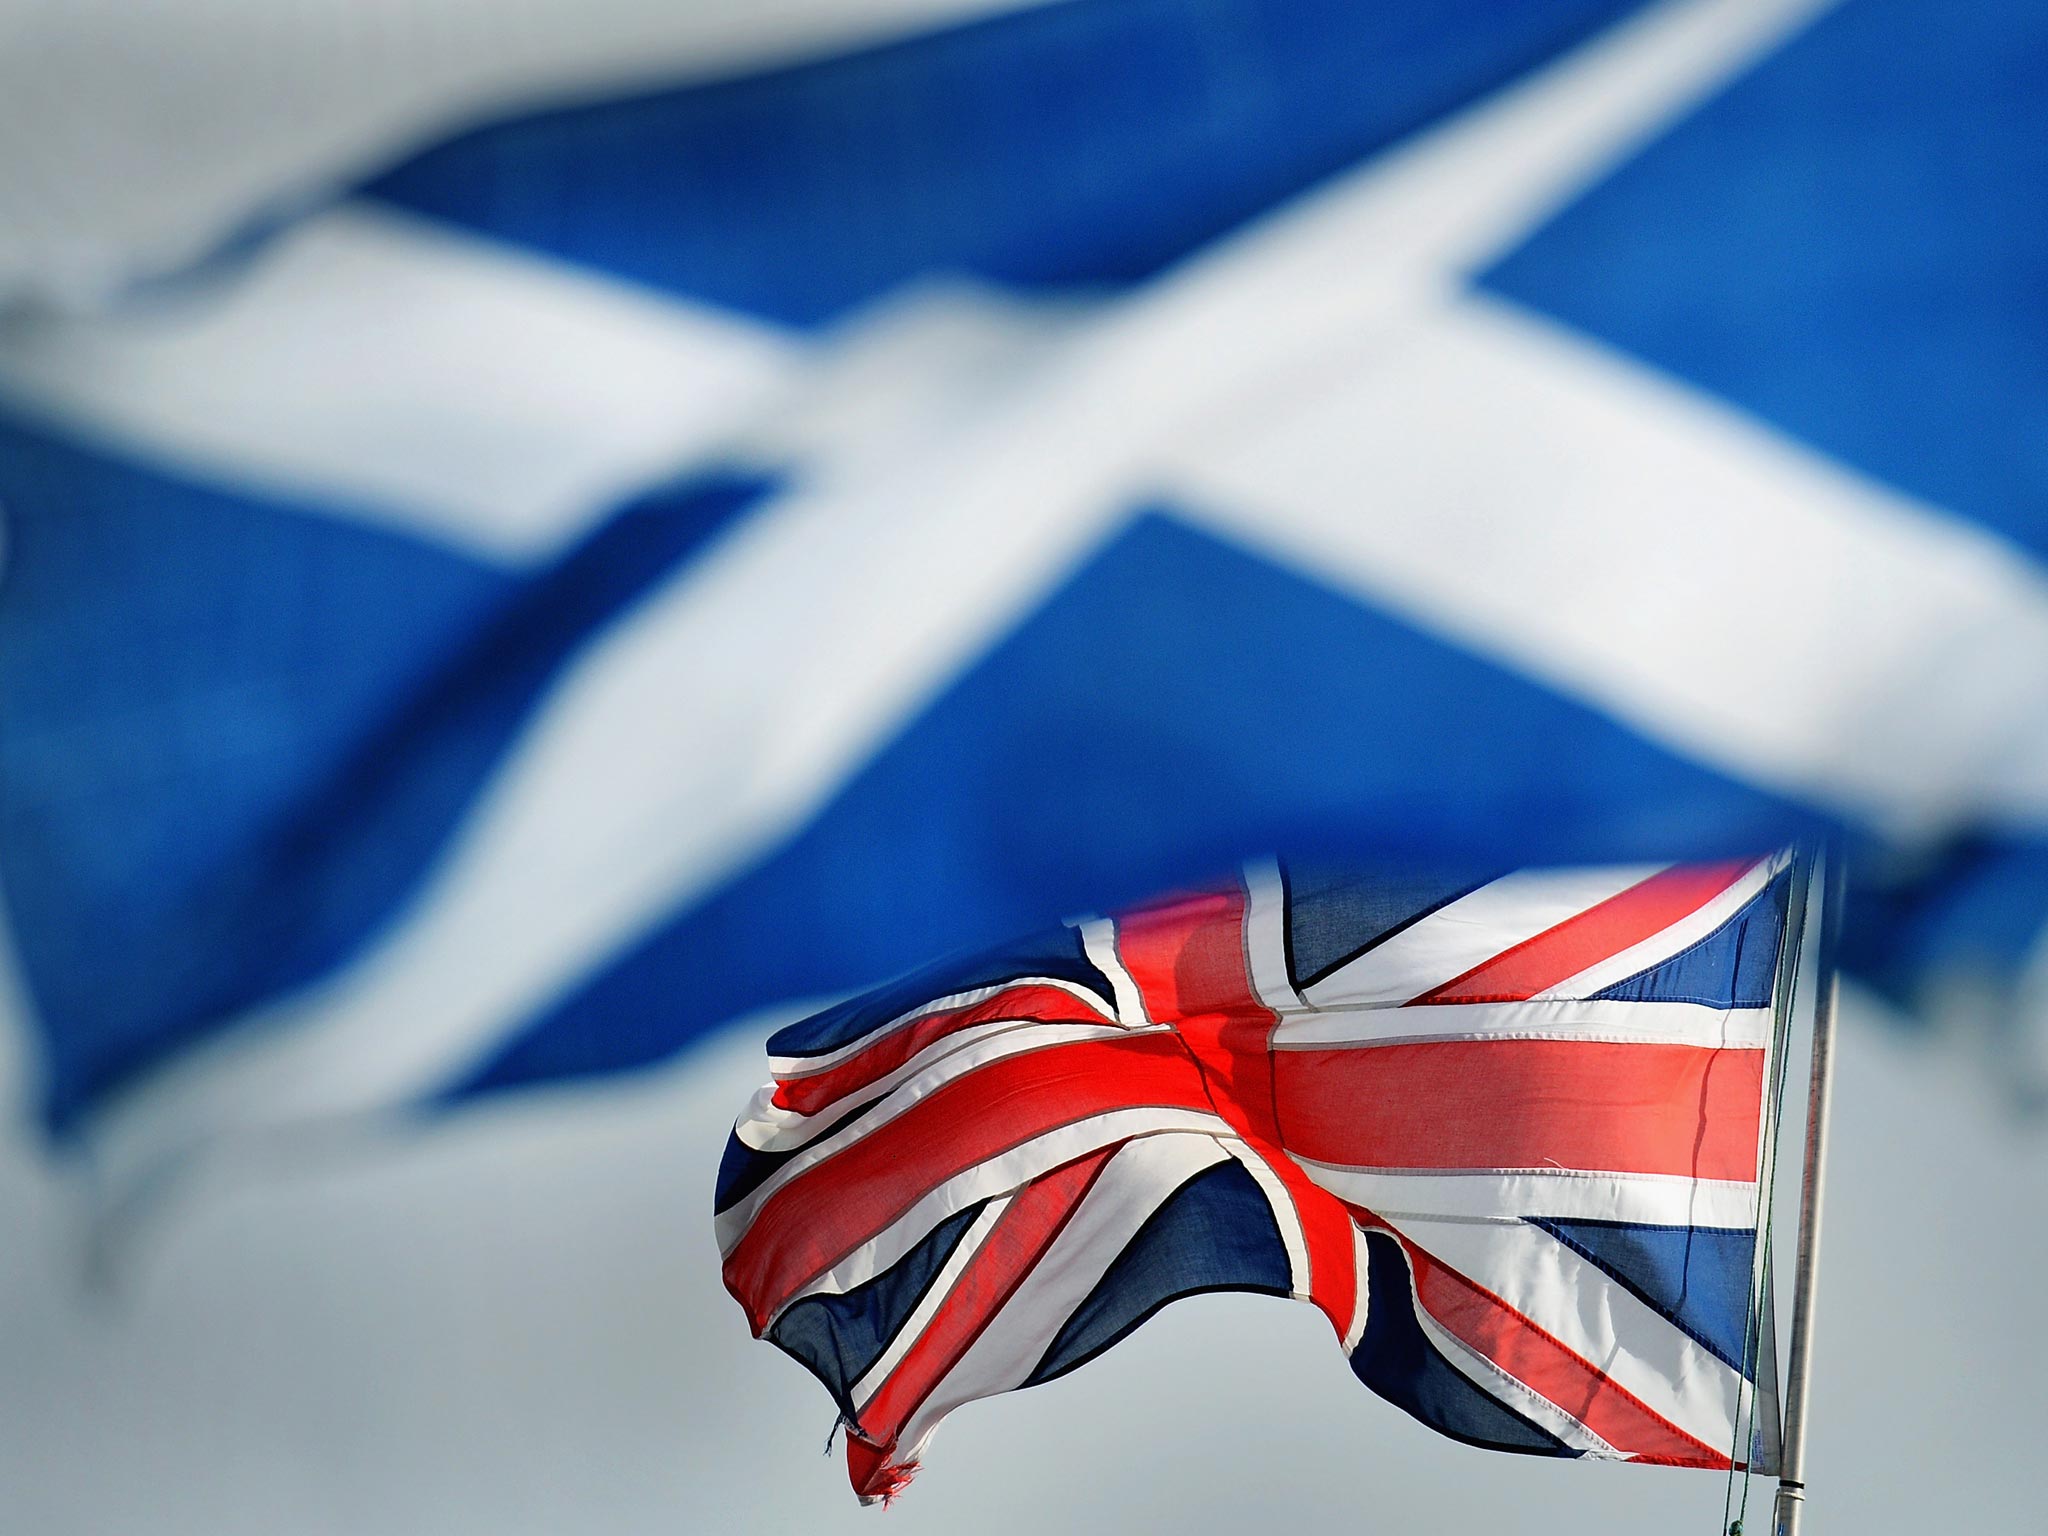 Even if Scotland achieves independence, the demands of the Scottish National Party will not necessarily be met